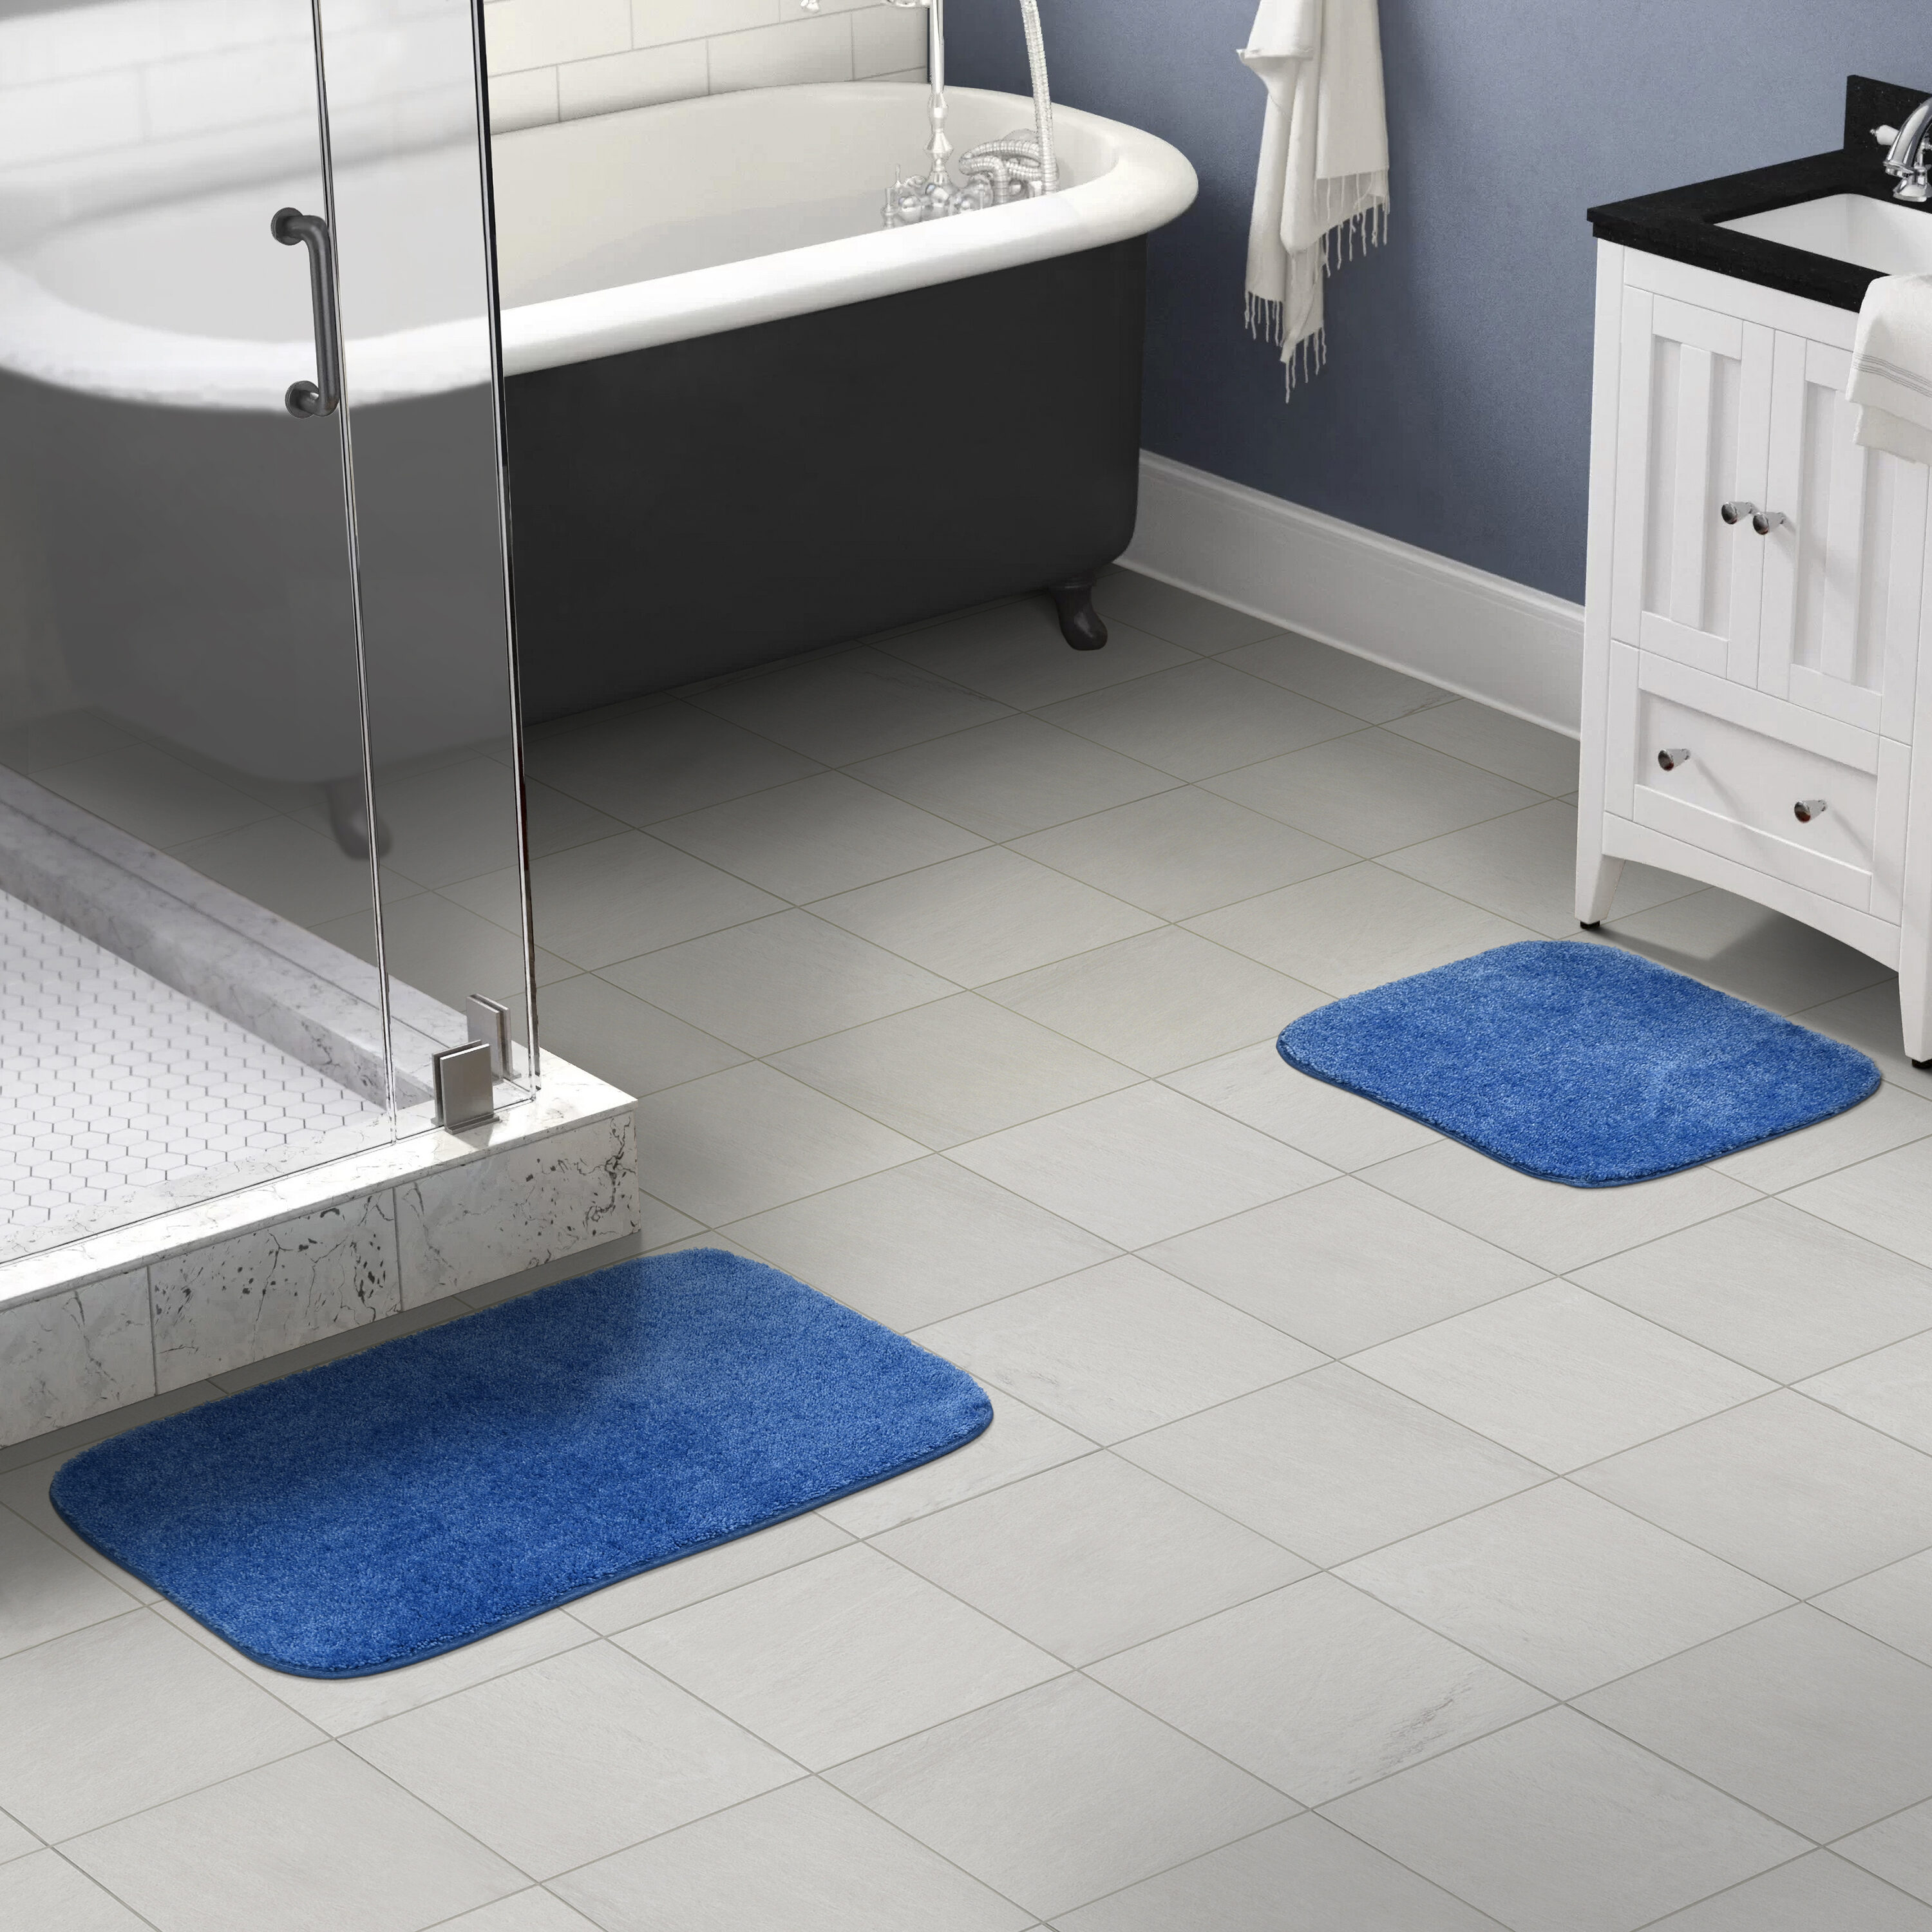 Hastings Home Bathroom Mats 22-in x 35-in Green Cotton Bath Mat in the Bathroom  Rugs & Mats department at